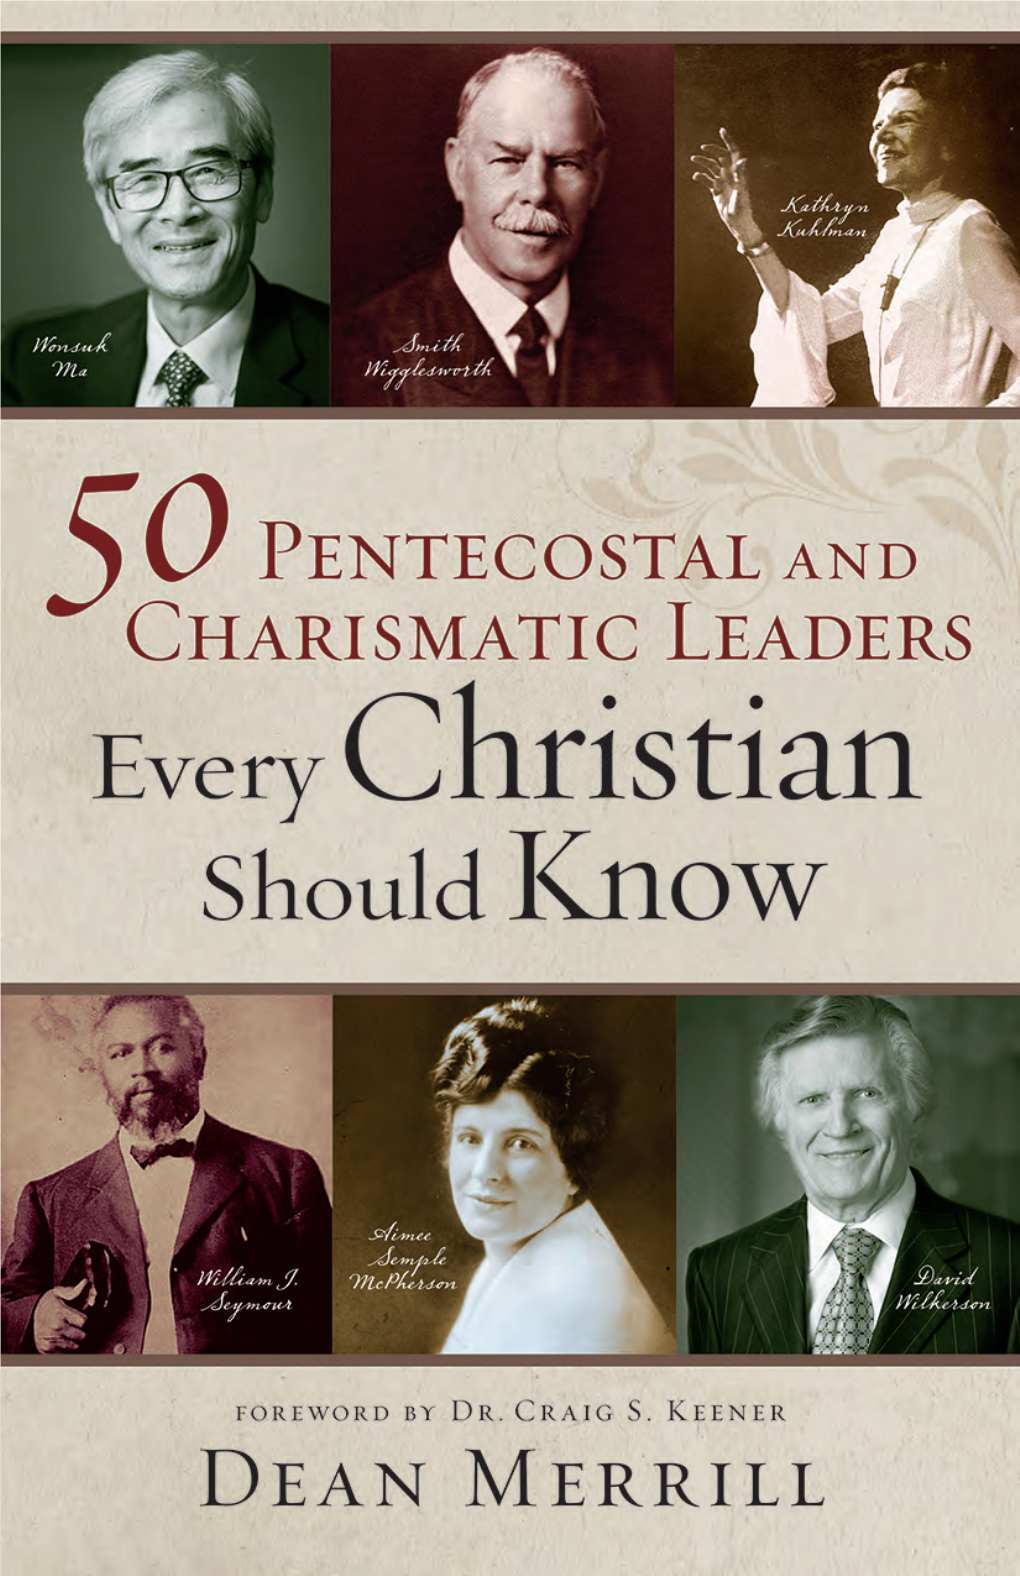 50 Pentecostal and Charismatic Leaders Every Christian Should Know / Dean Merrill